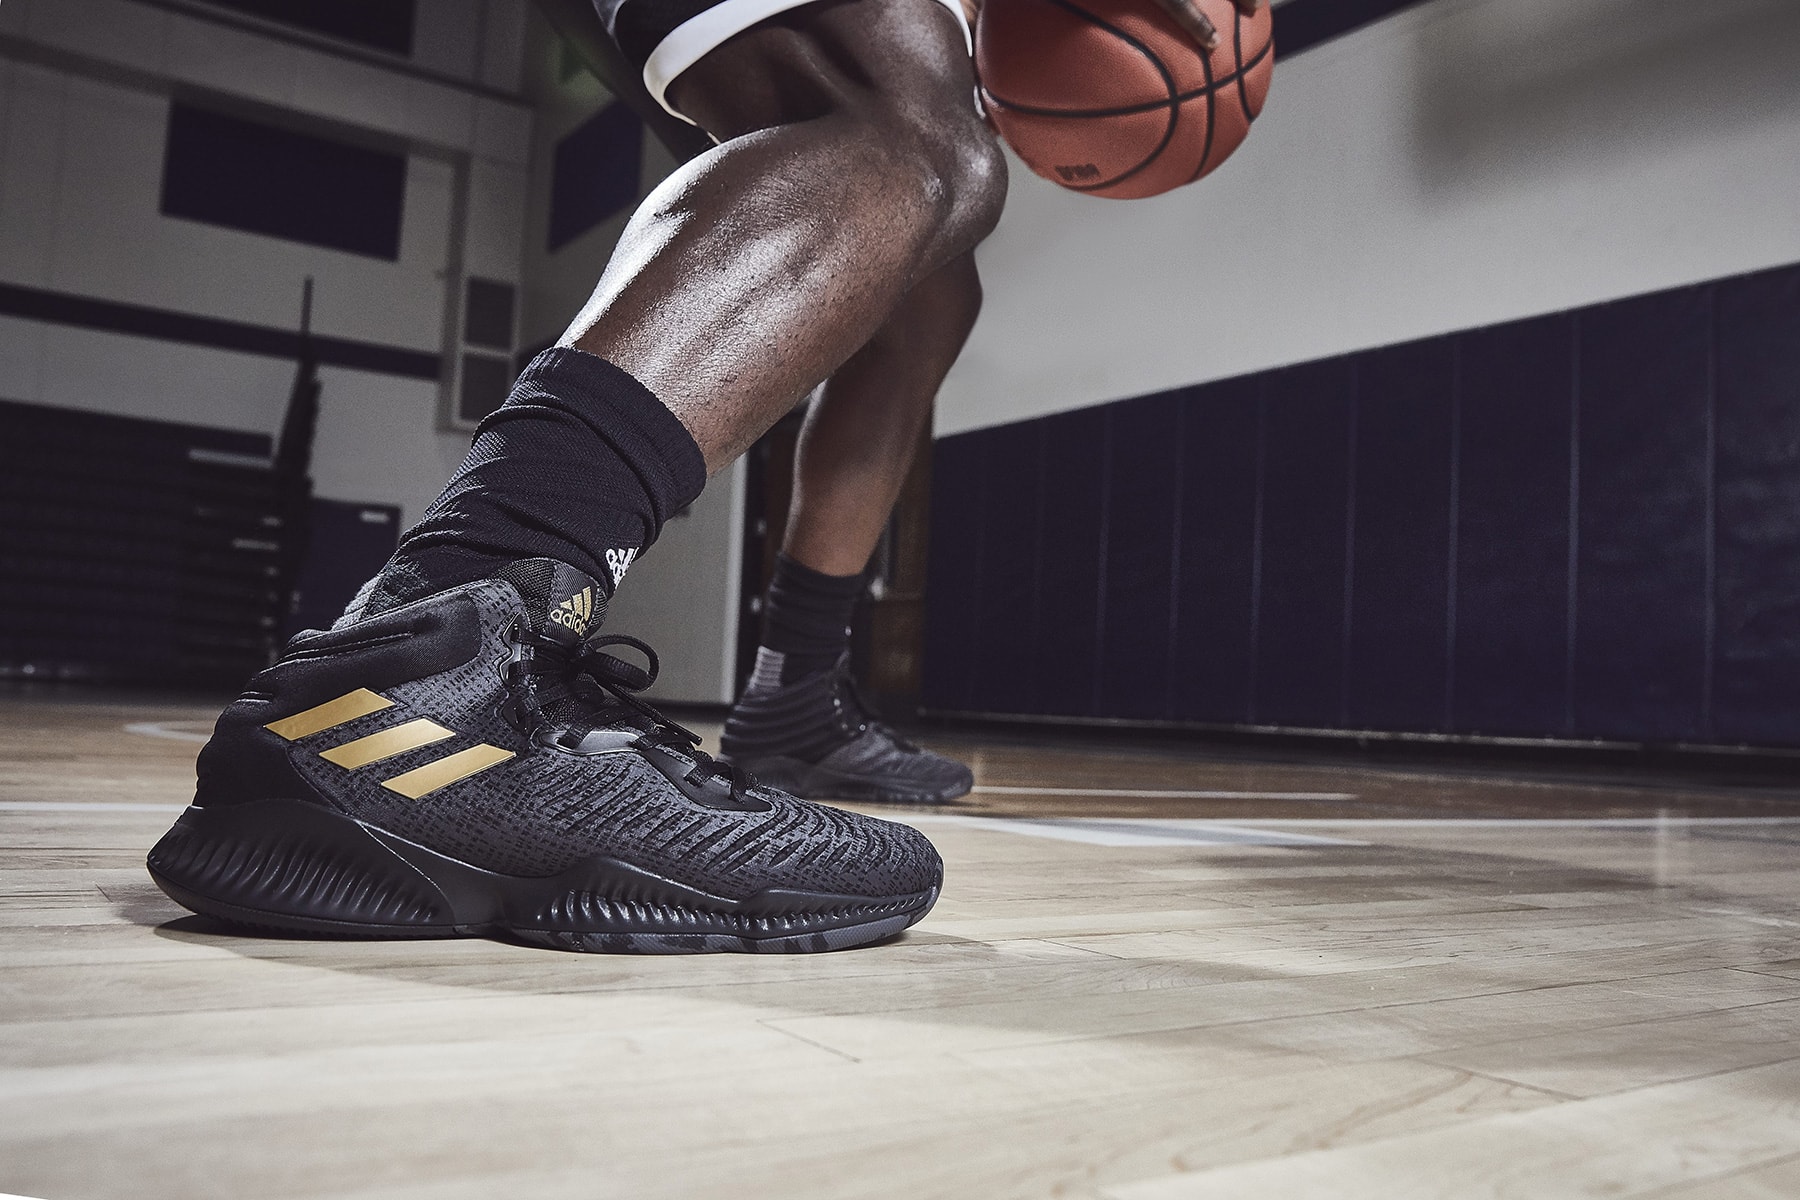 adidas basketball pro bounce mad bounce footwear october 2018 Donovan Mitchell Zach LaVine Kristaps Porzingis Chiney Ogwumike Candace Parker Kyle Lowry Nick Young Jaylen Brown Kelly Oubre Jr.